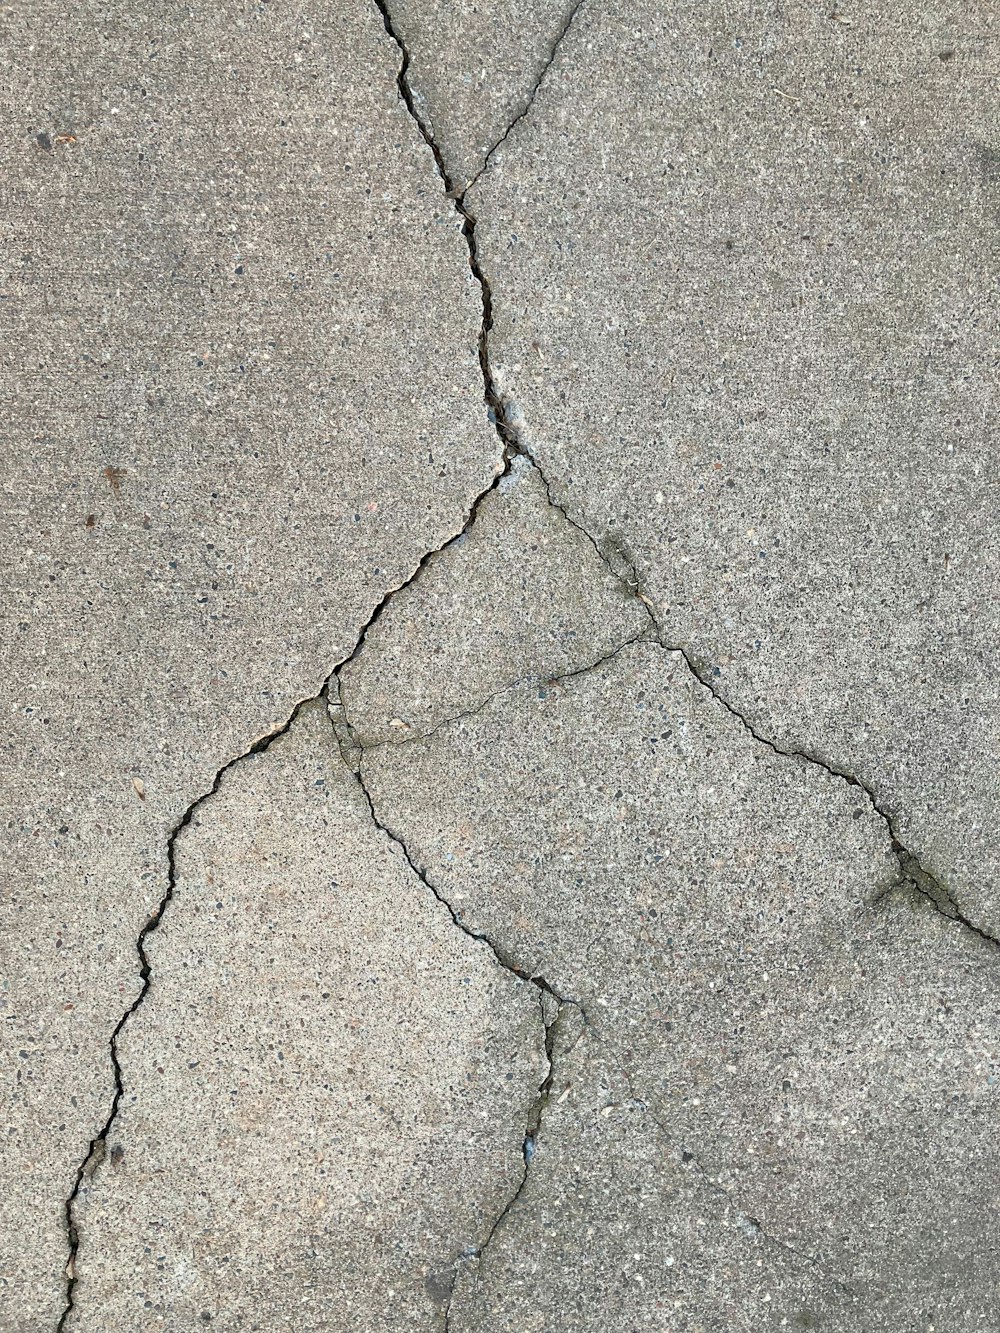 the crack in the concrete shows a crack in the road